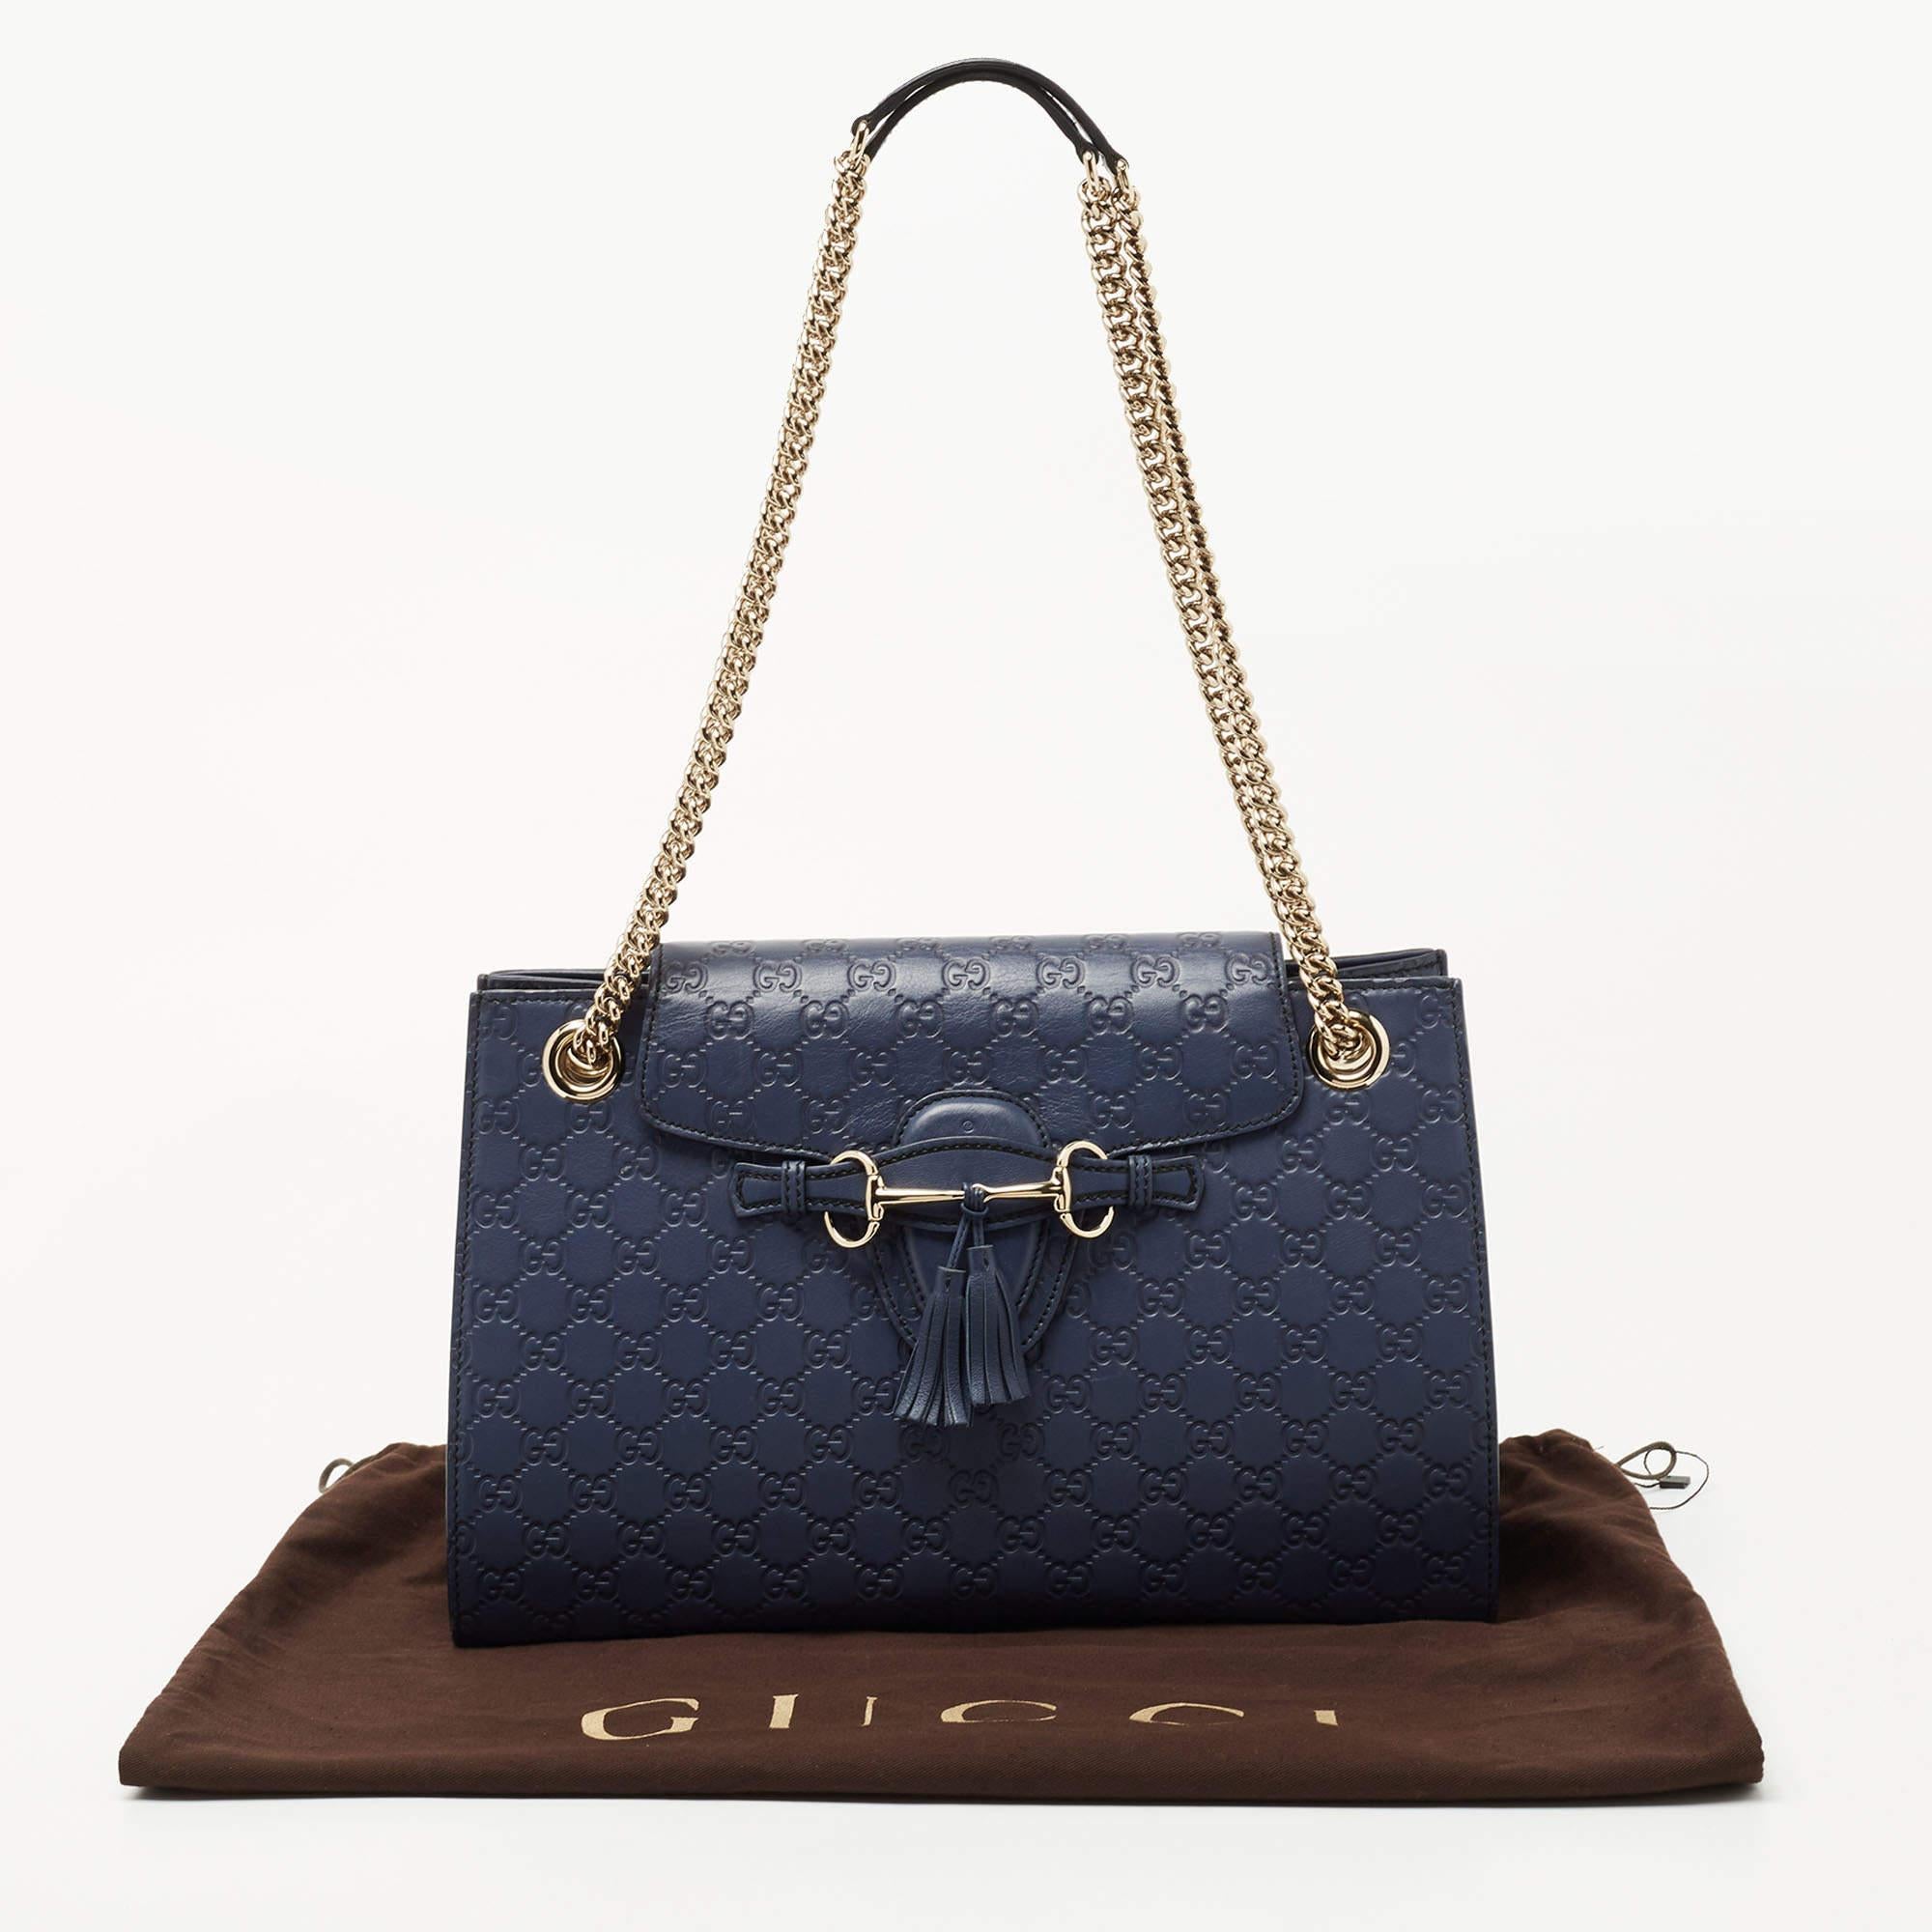 Gucci Dark Blue Guccissima Leather Large Emily Chain Shoulder Bag 3